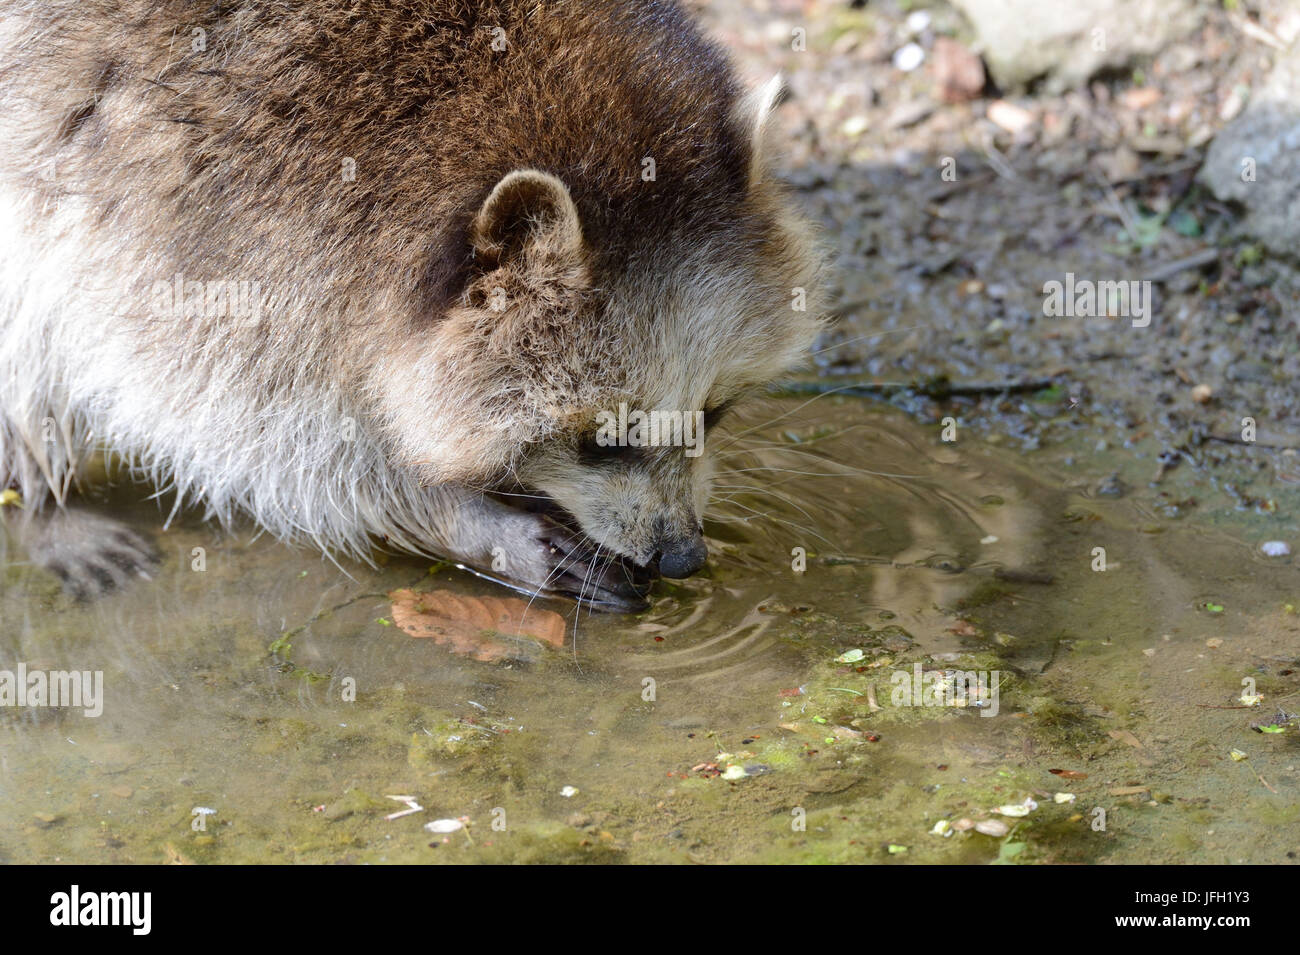 Racoon, water, detail, Stock Photo